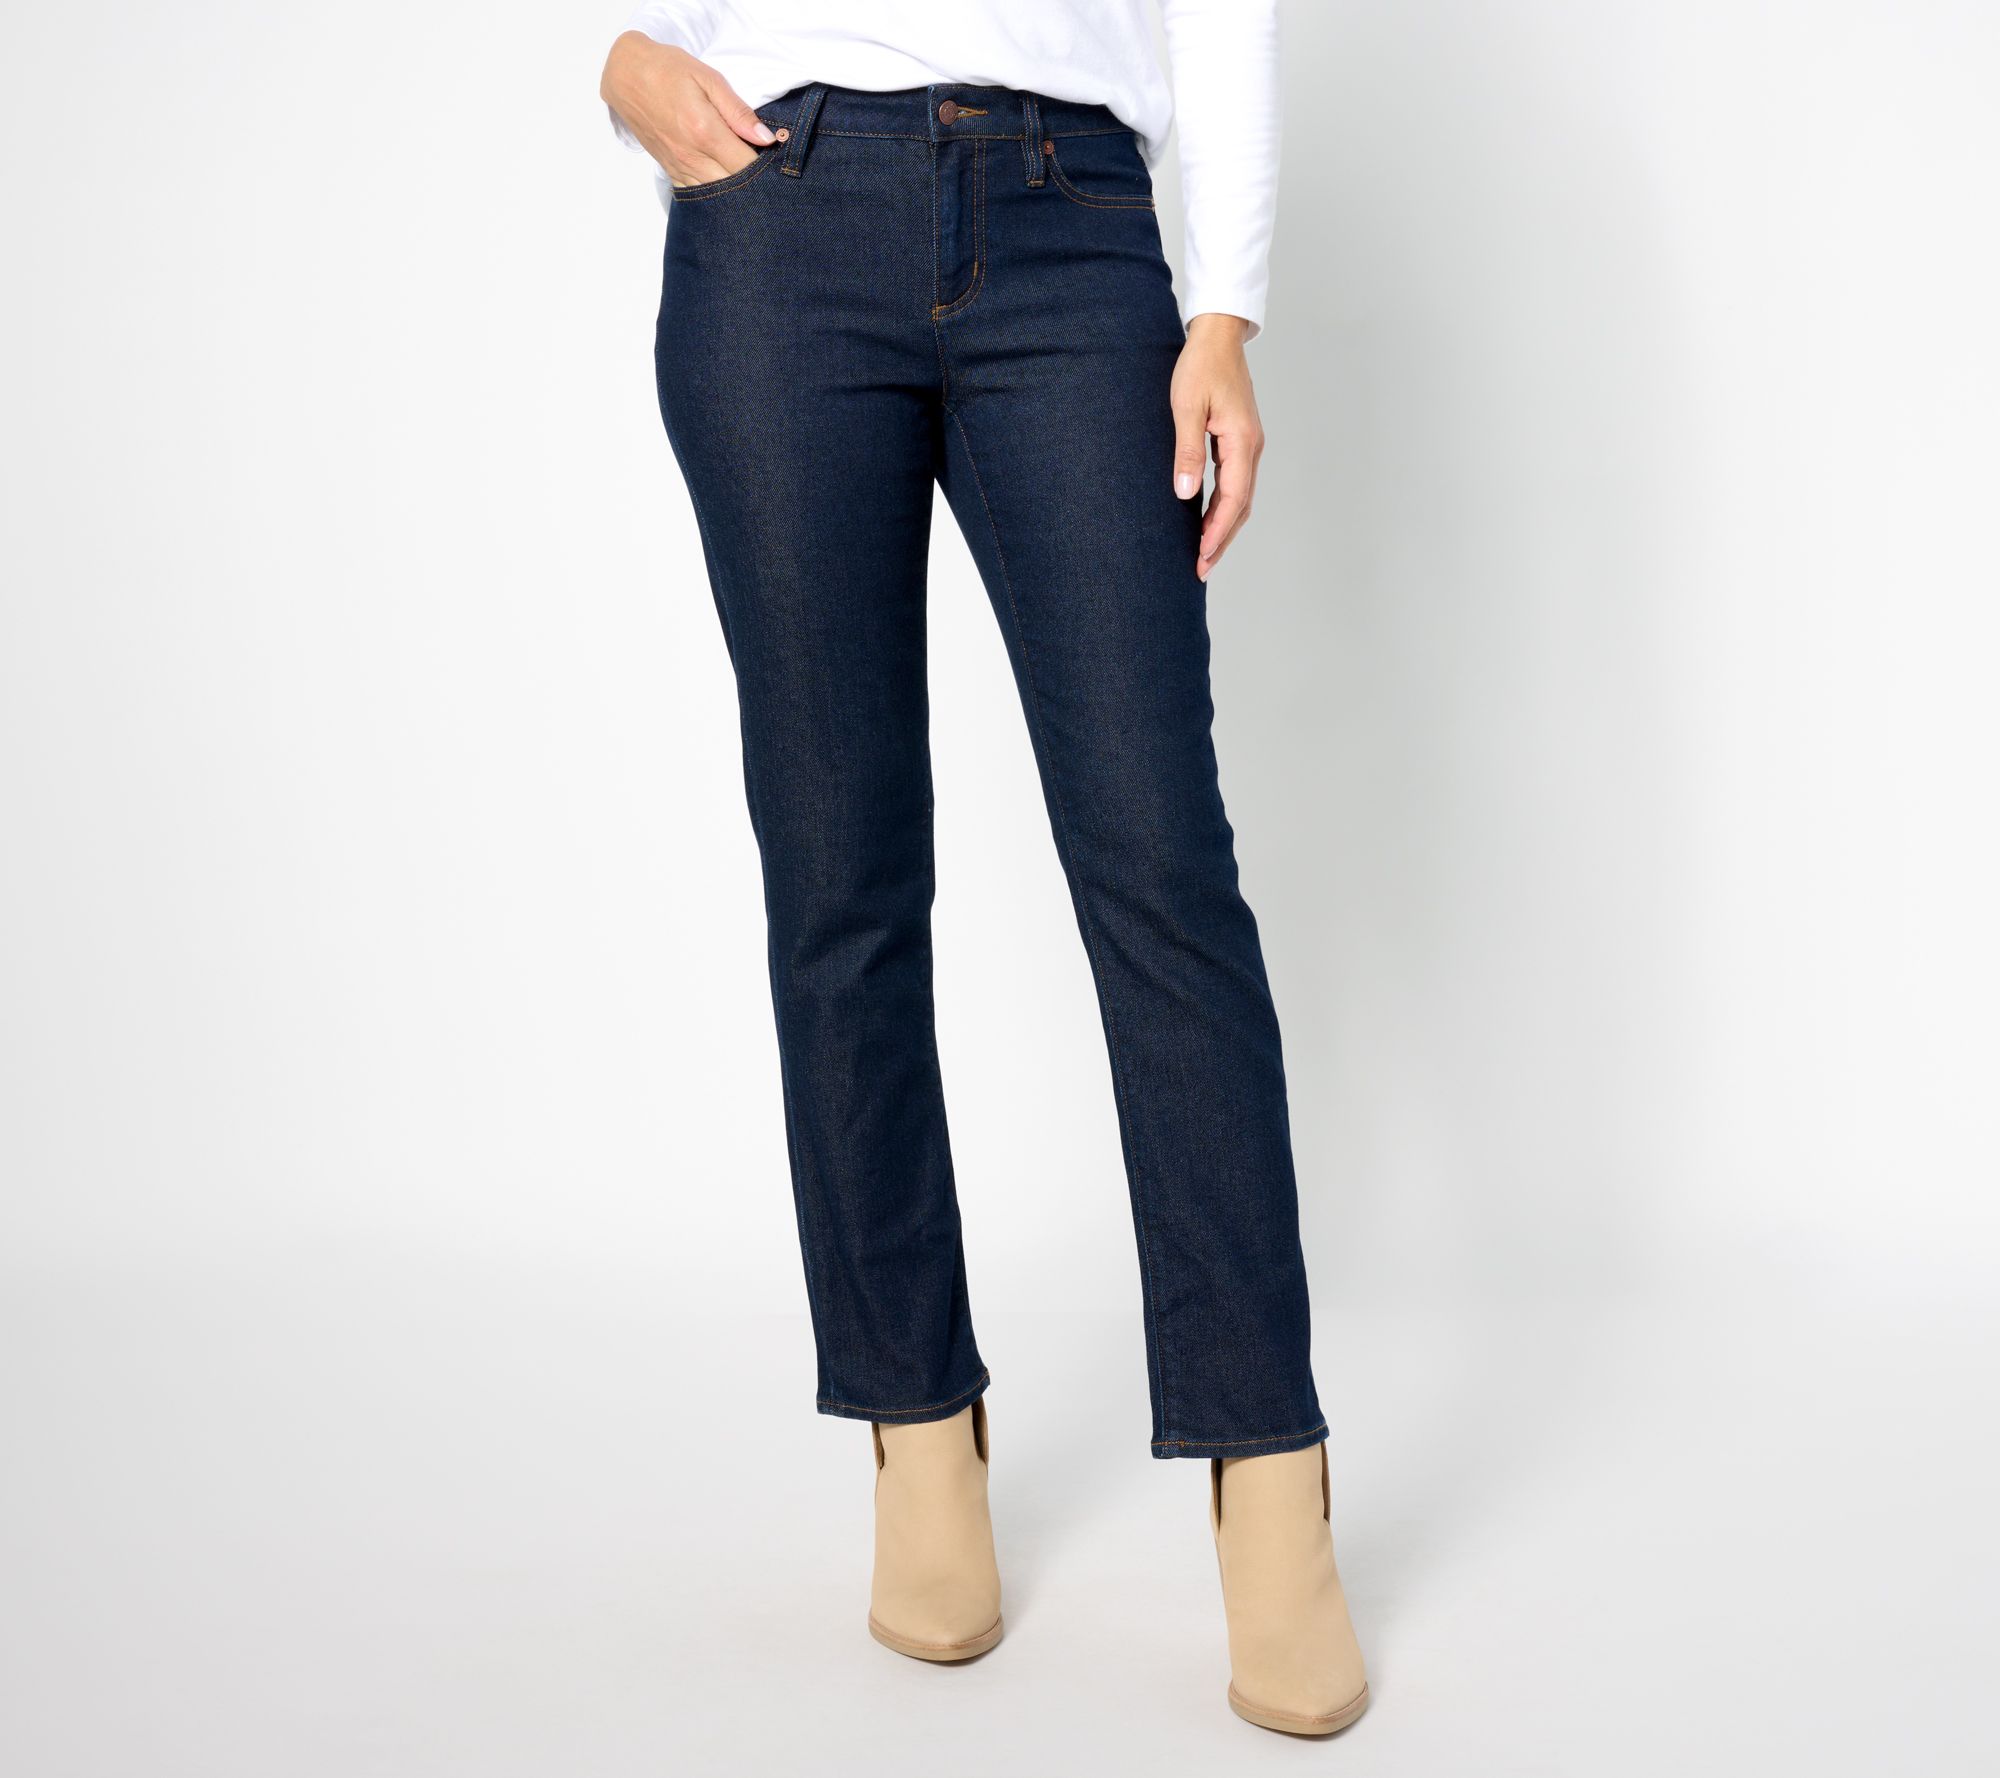 As Is Lands' End Petite 28 Inseam Recover Denim Straight Leg Jeans 